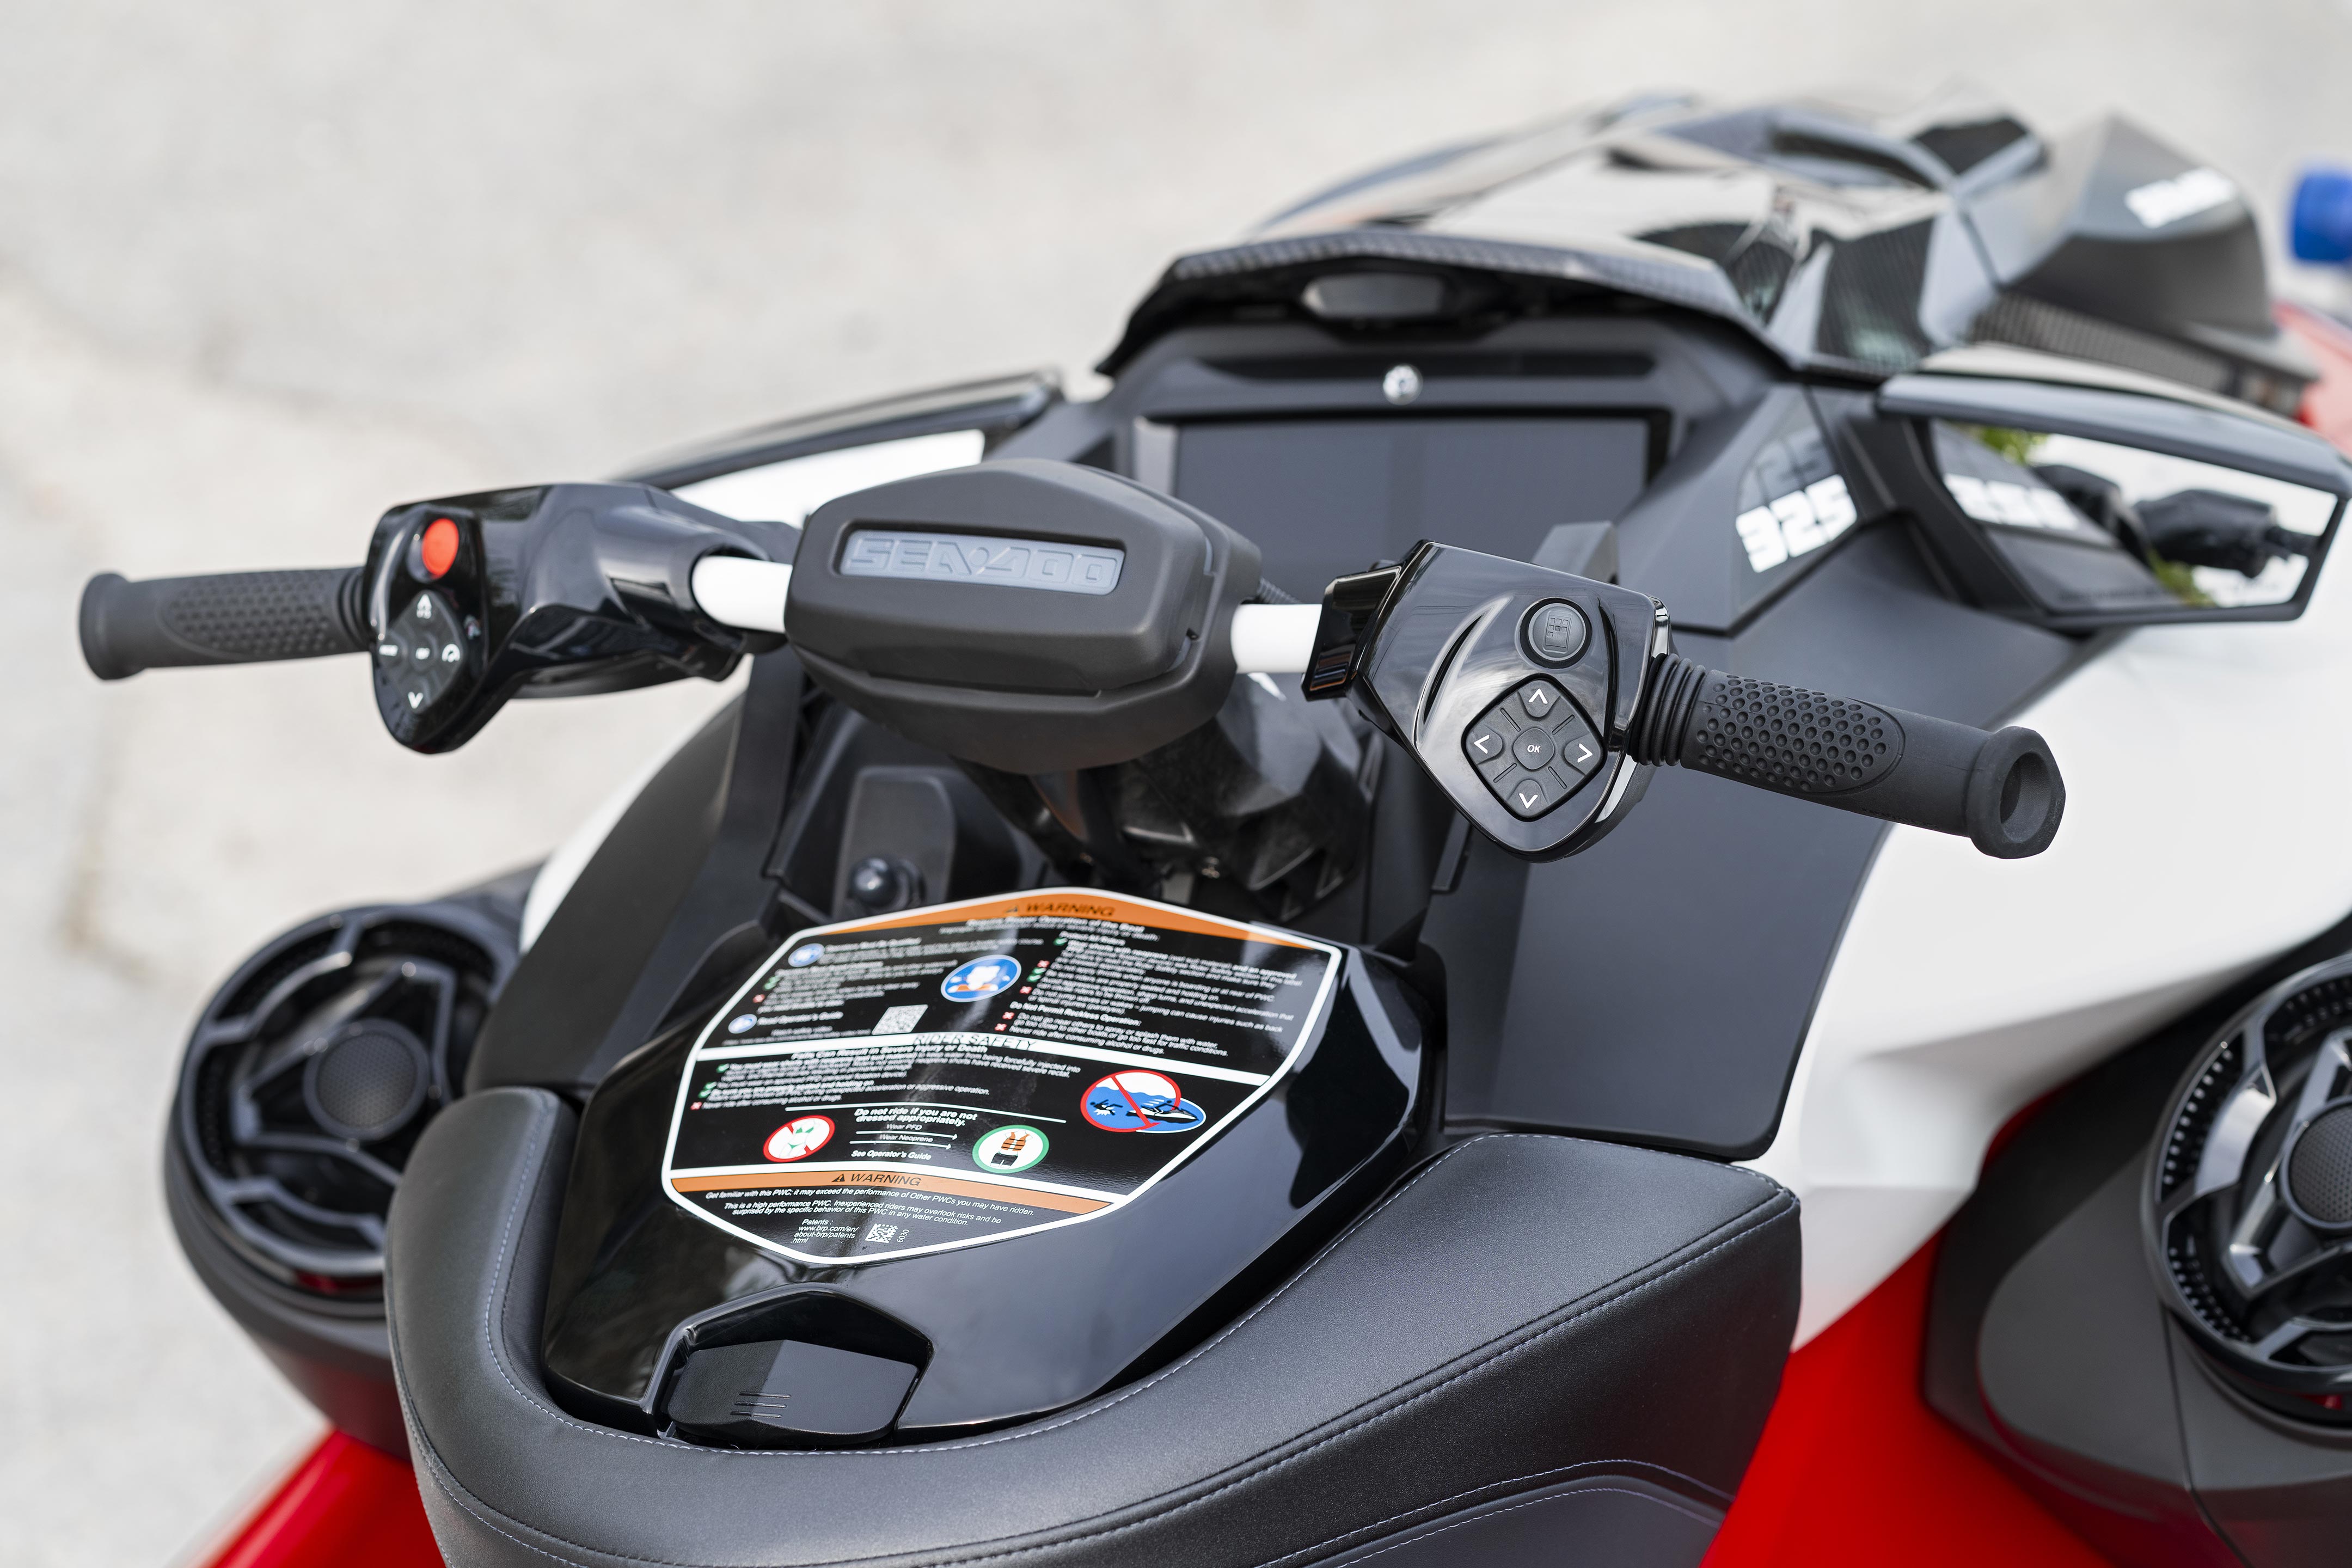 Handlebars, audio system and LCD display of the 2024 Sea-Doo RXP-X personal watercraft